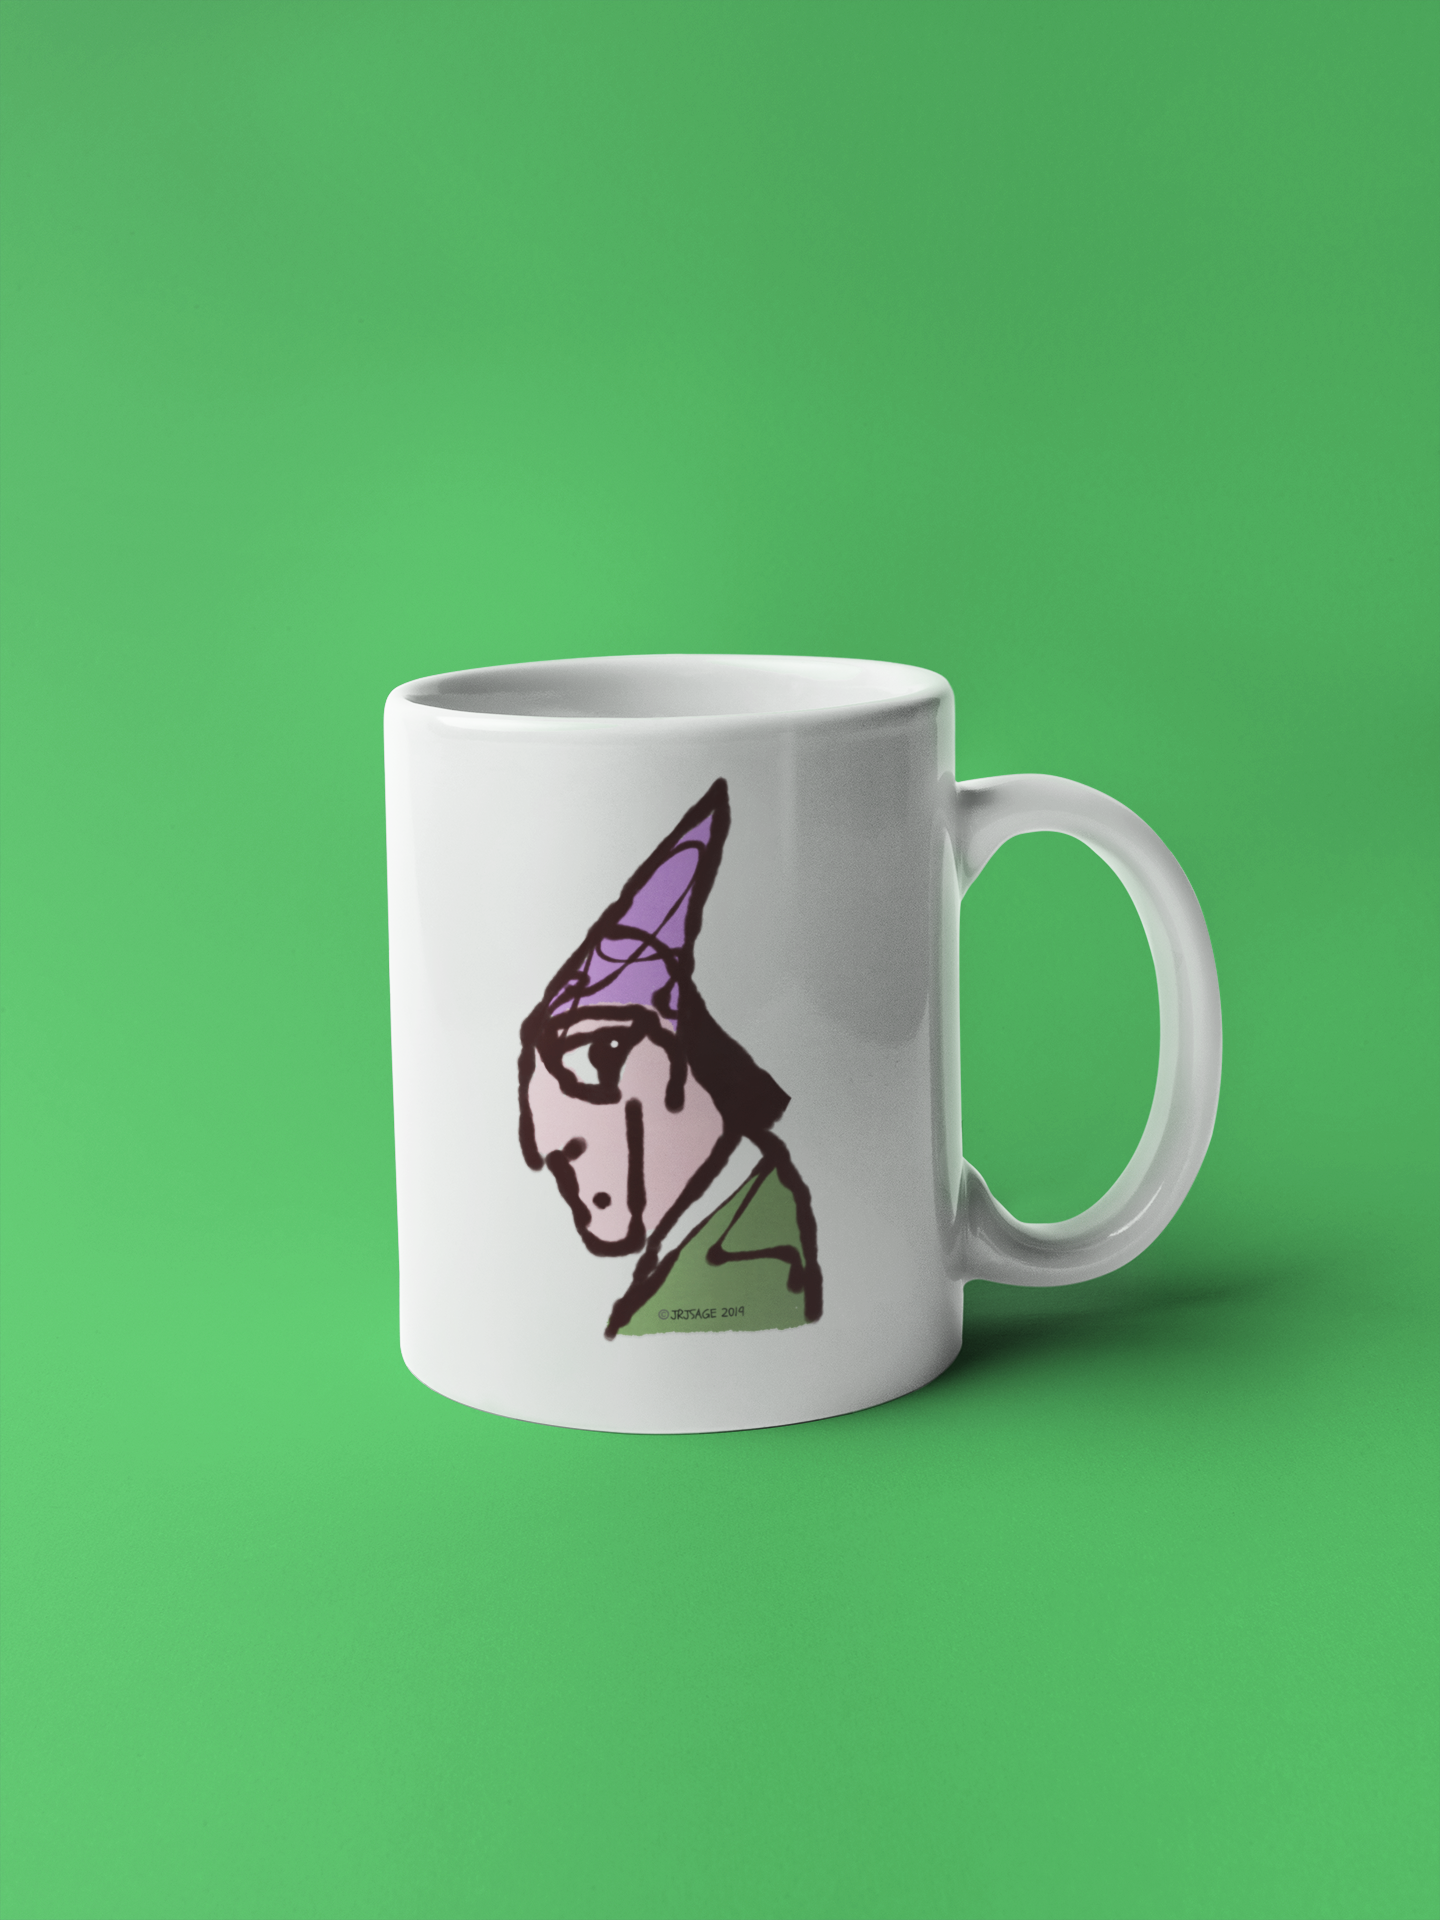 Wizard coffee mug - Illustrated magicial wizard design on a mug by Hector and Bone